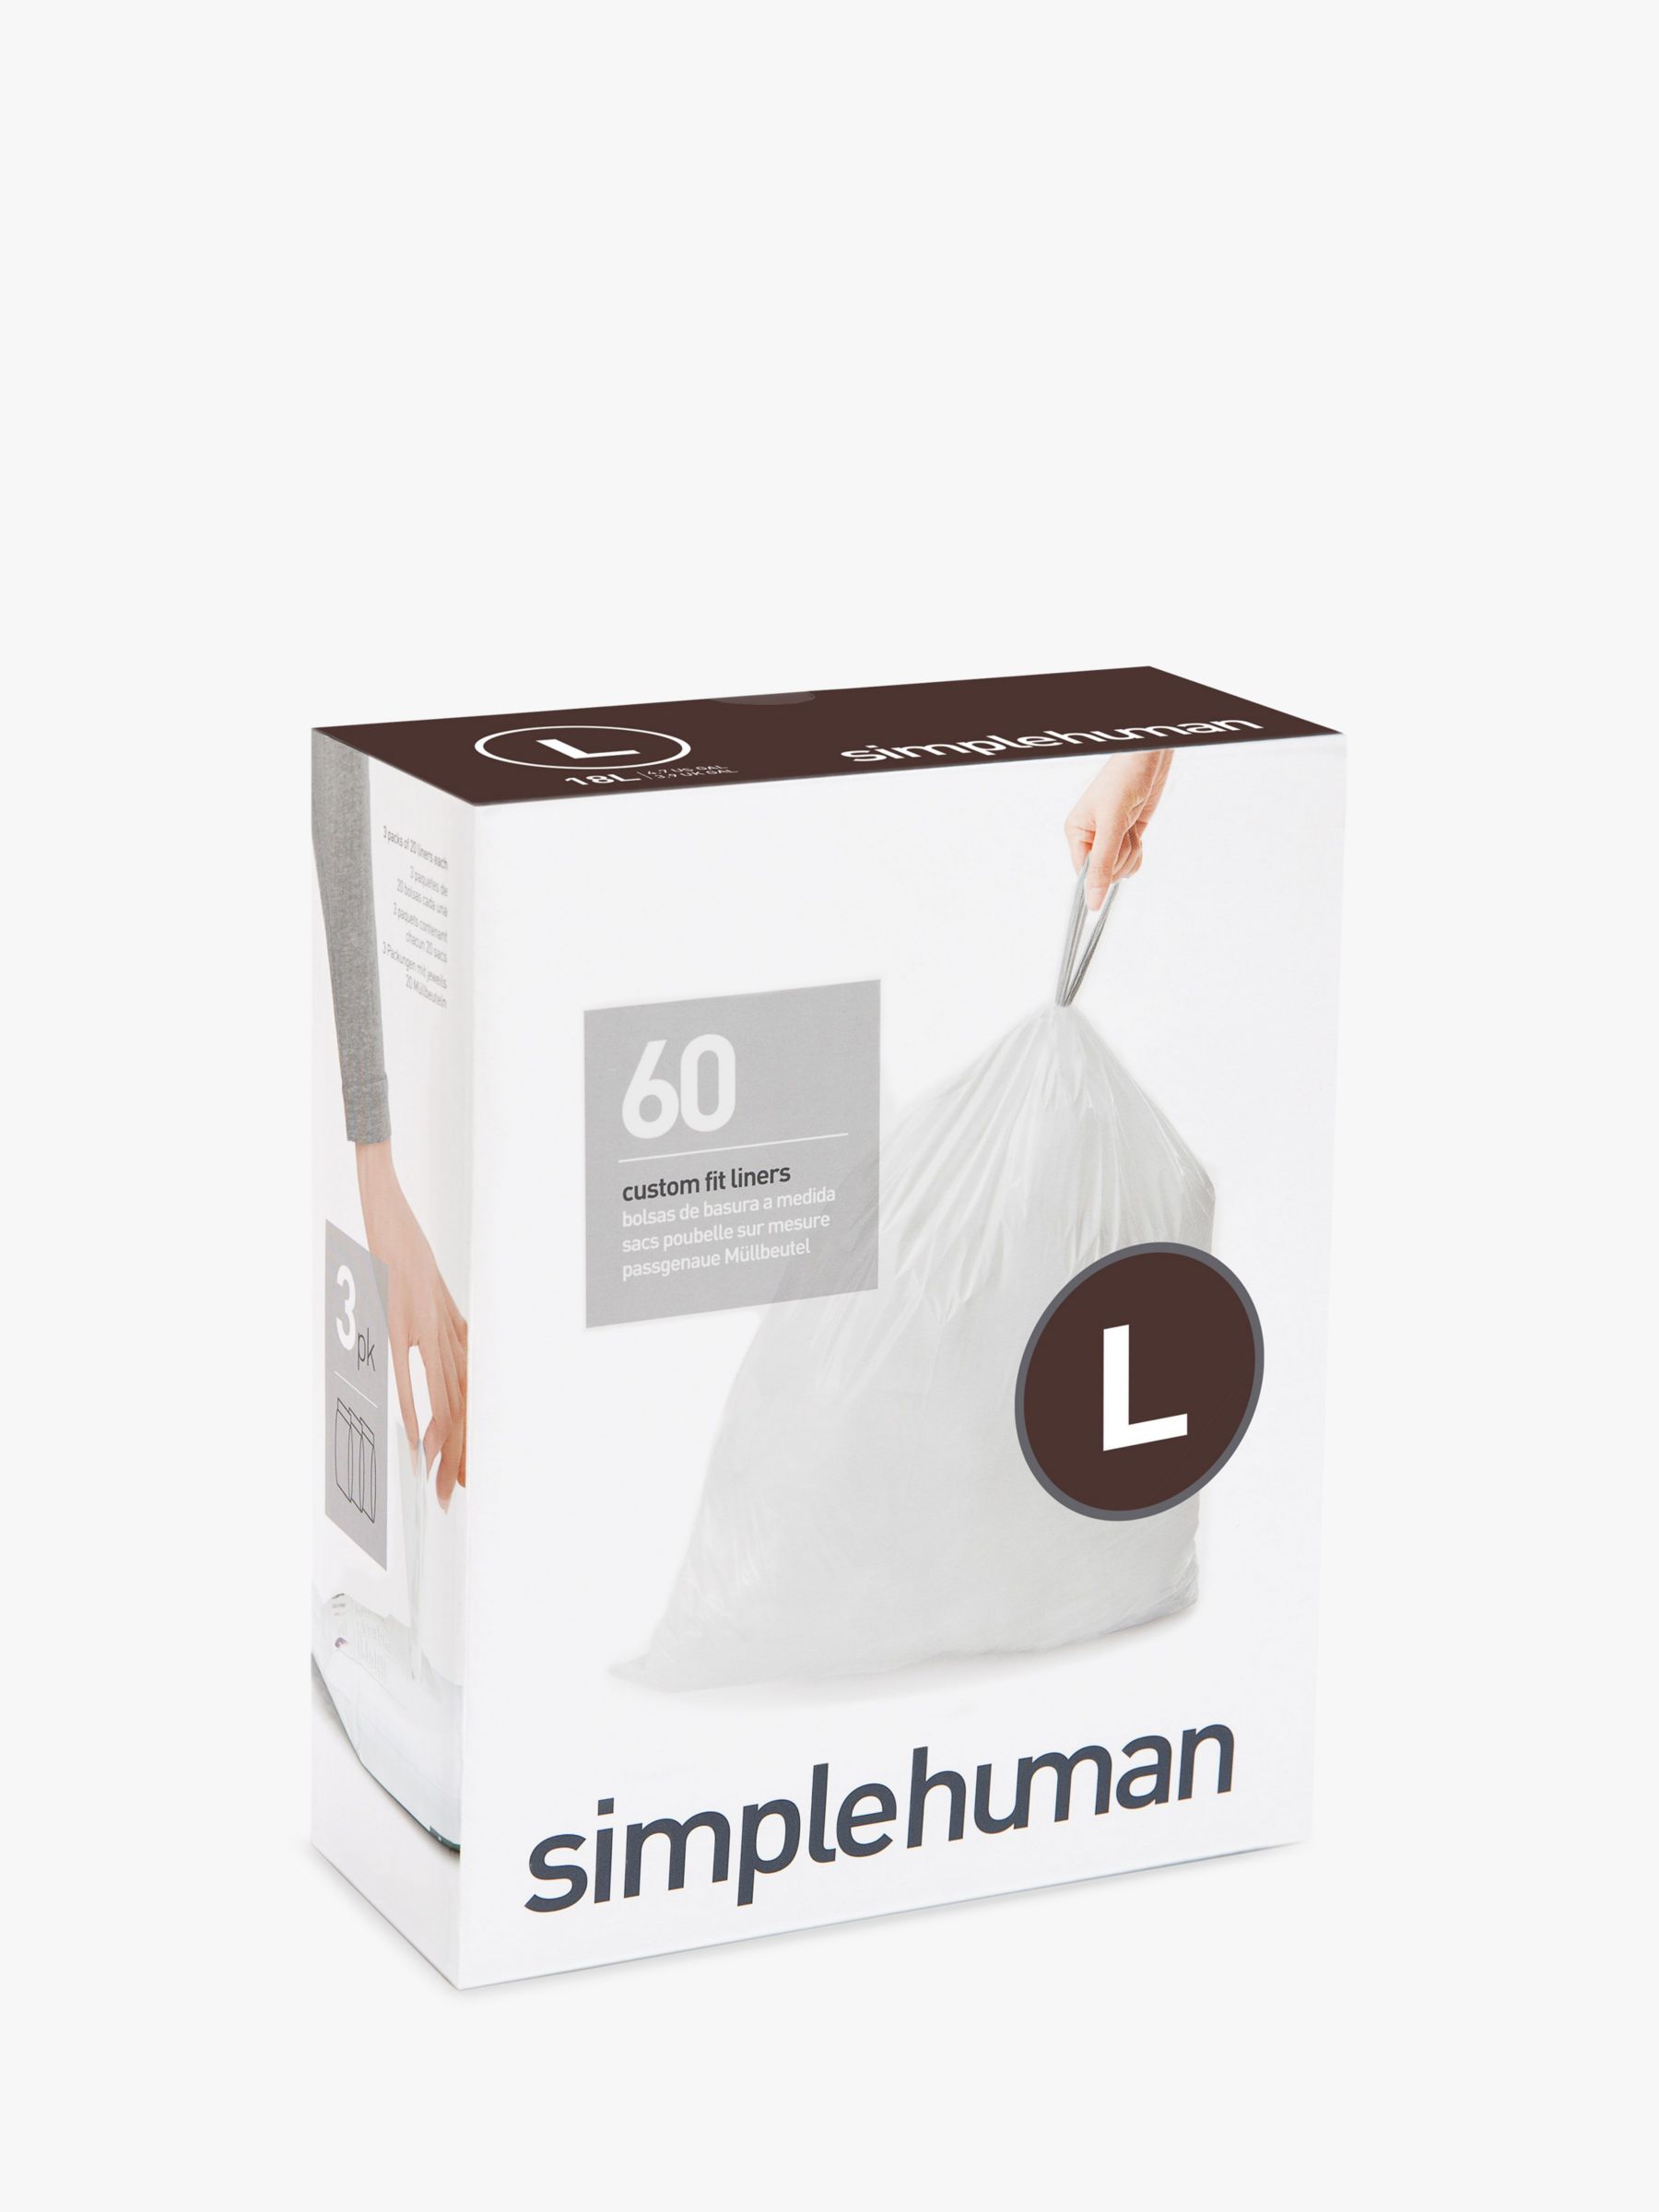 simplehuman Bin Liners, Size L, Pack of 60 at John Lewis & Partners